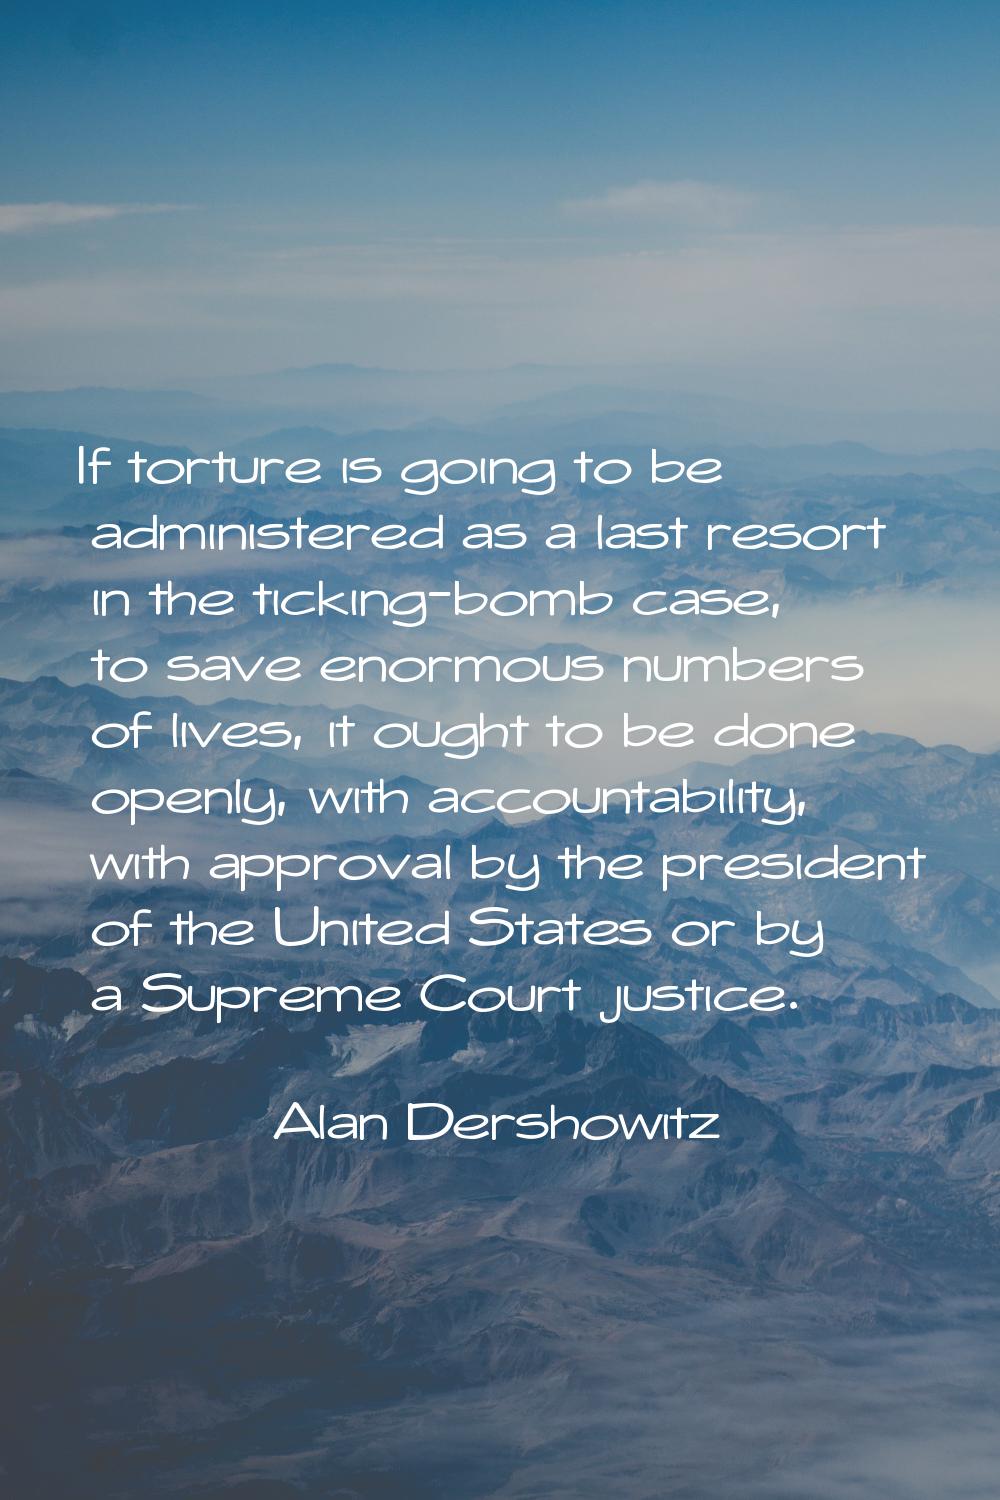 If torture is going to be administered as a last resort in the ticking-bomb case, to save enormous 